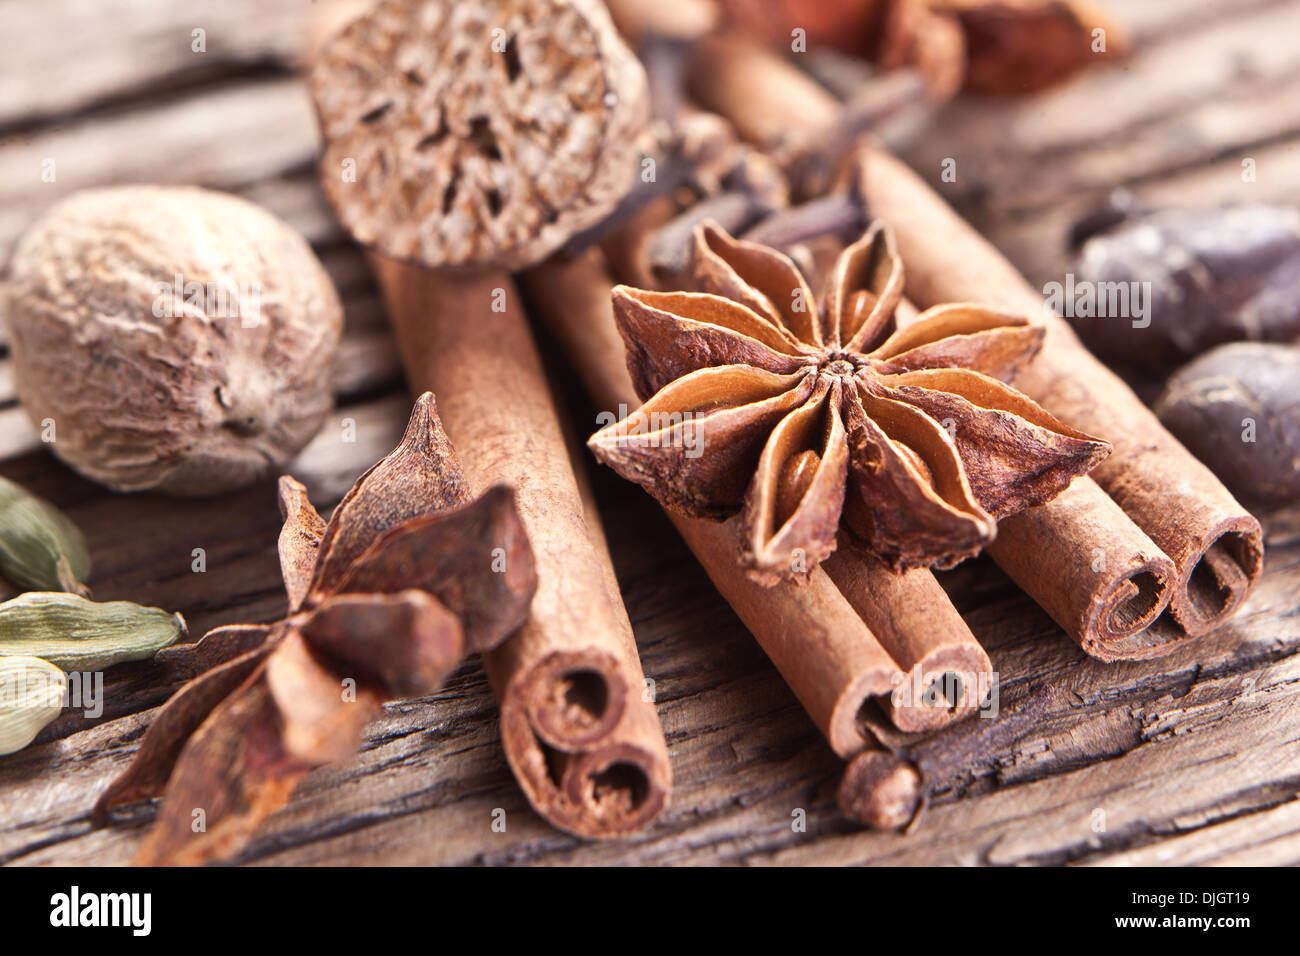 Spices on a old wooden table. Stock Photo